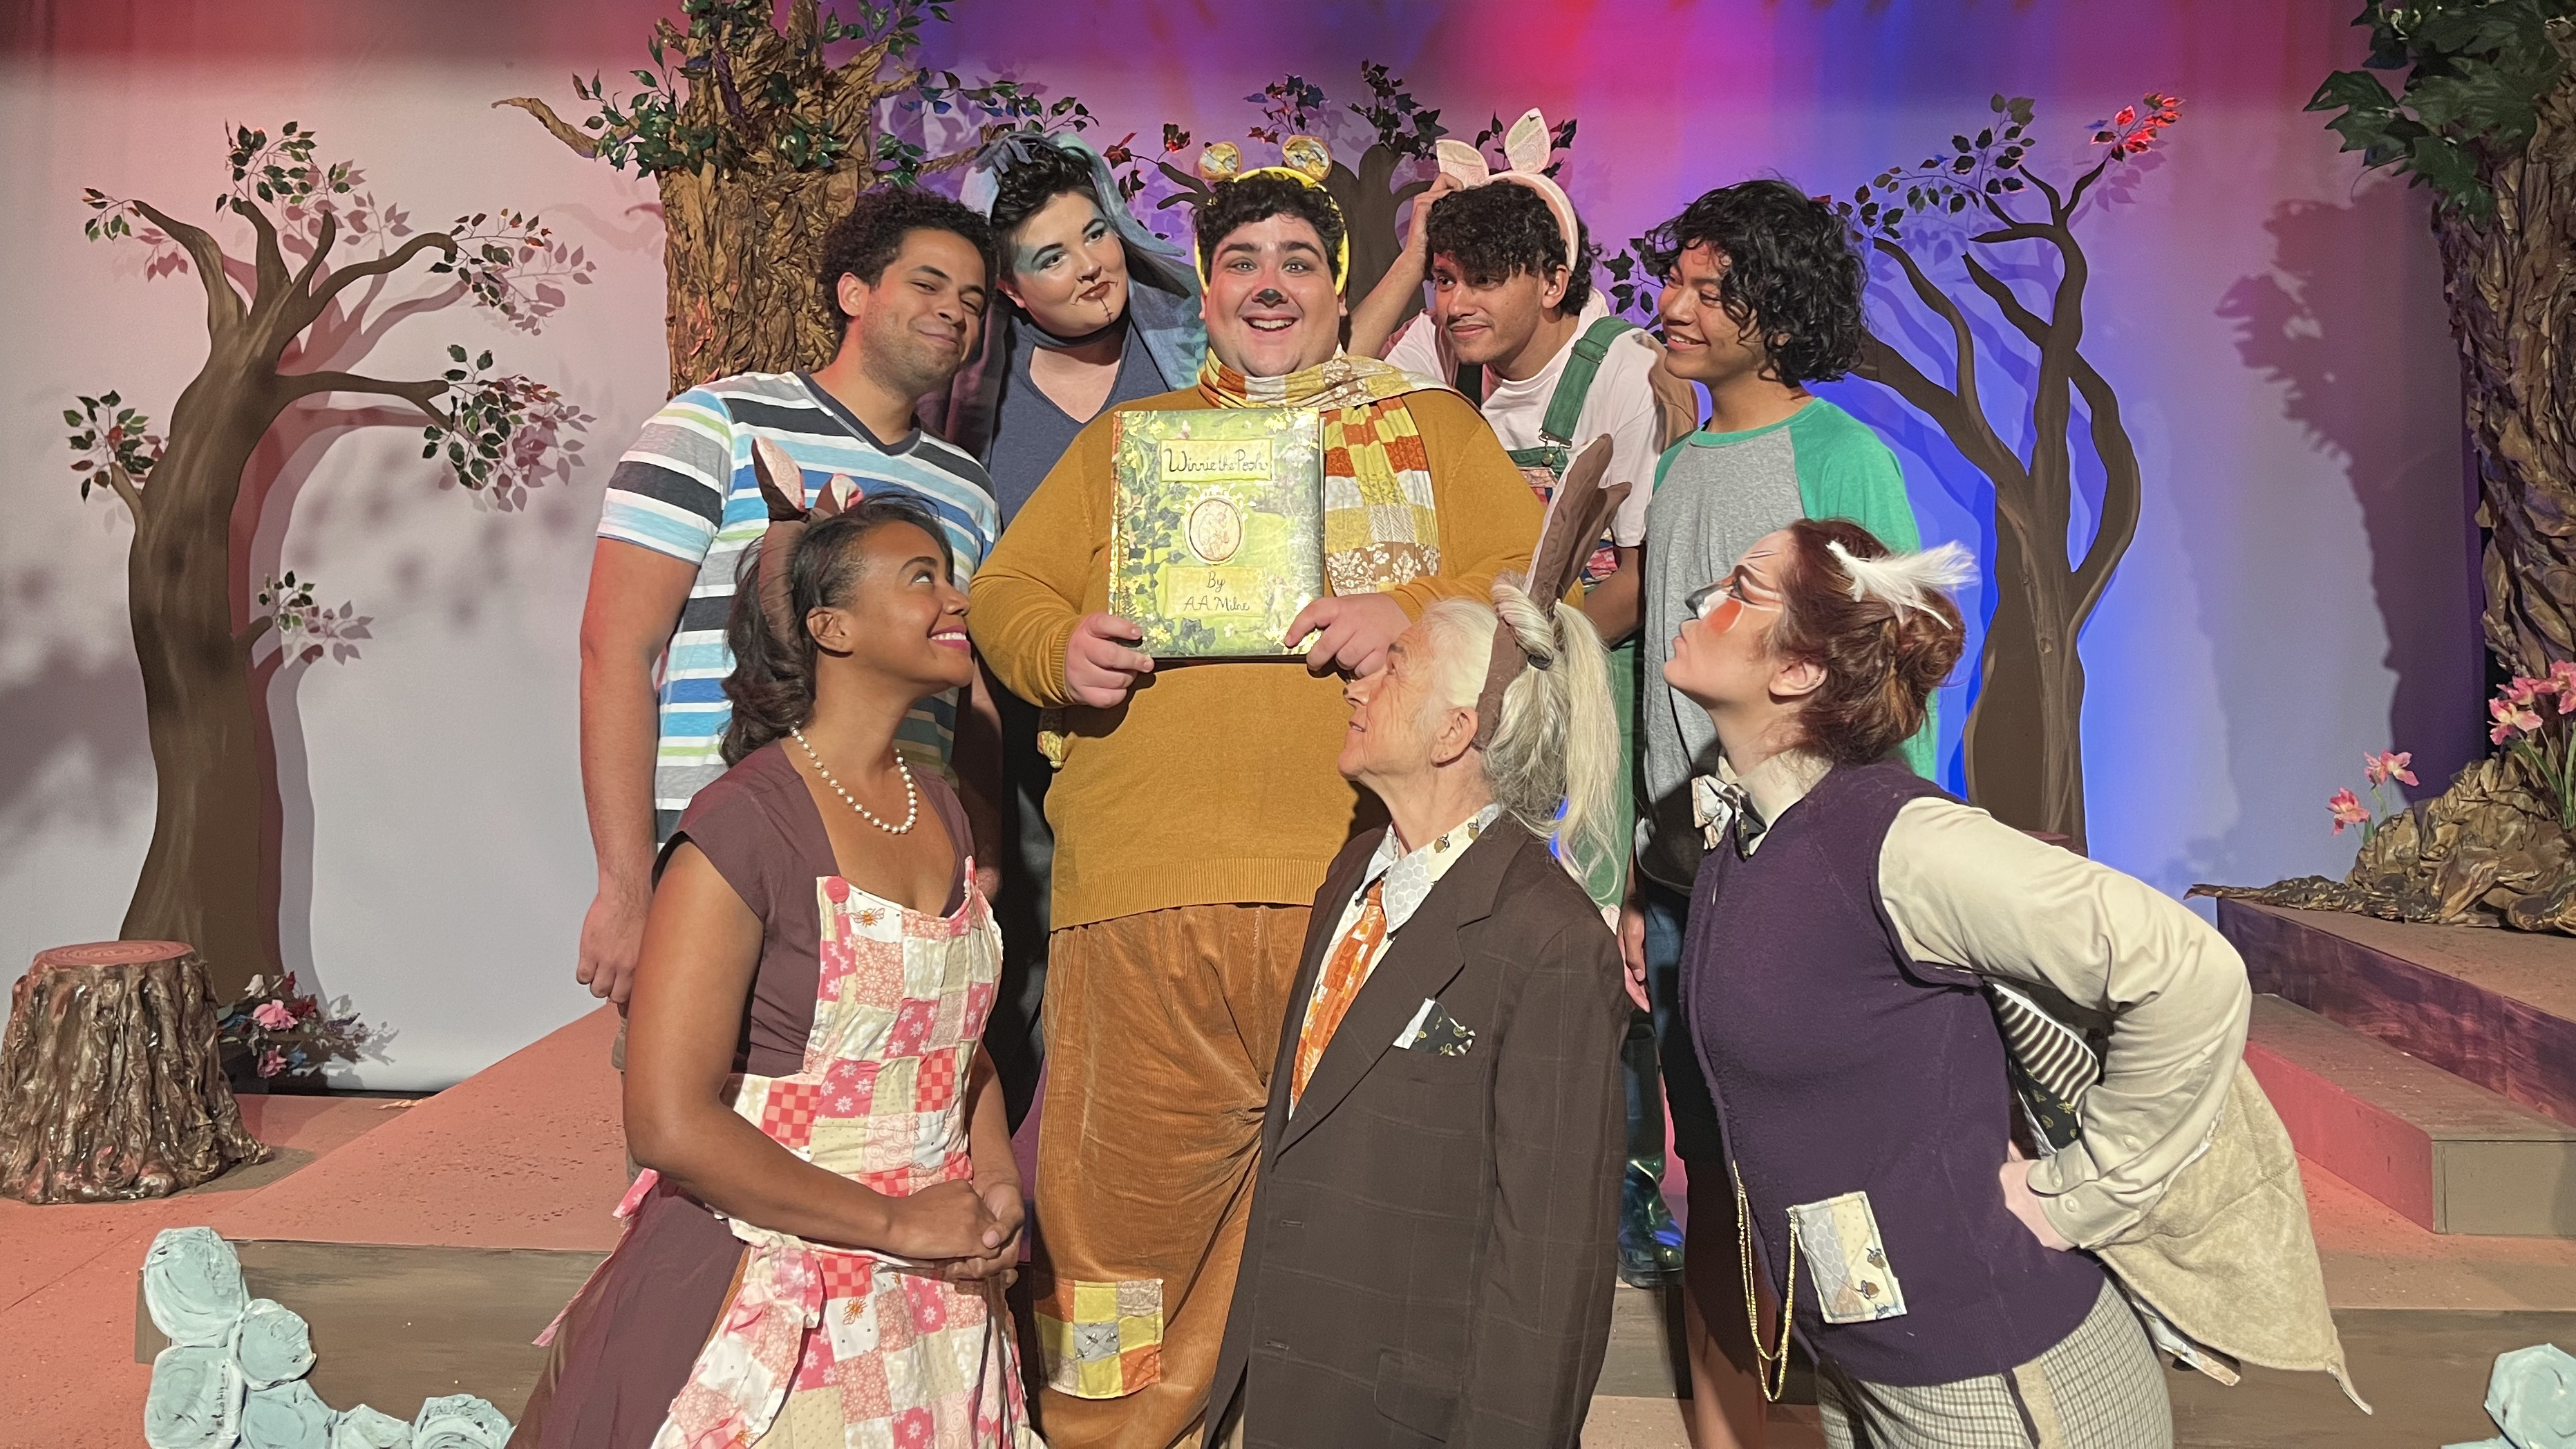 The cast of "Pooh", showing at the Scoundrel & Scamp Theatre through Dec. 11th, 2022. Top L-R : Lance Guzman, Samantha Severson, Robbie Voigt, Wesley Geary 
Middle : Tyler Gastelum 
Bottom L-R: Tanisha Ray, Carlisle Ellis, Abigail Dunscomb